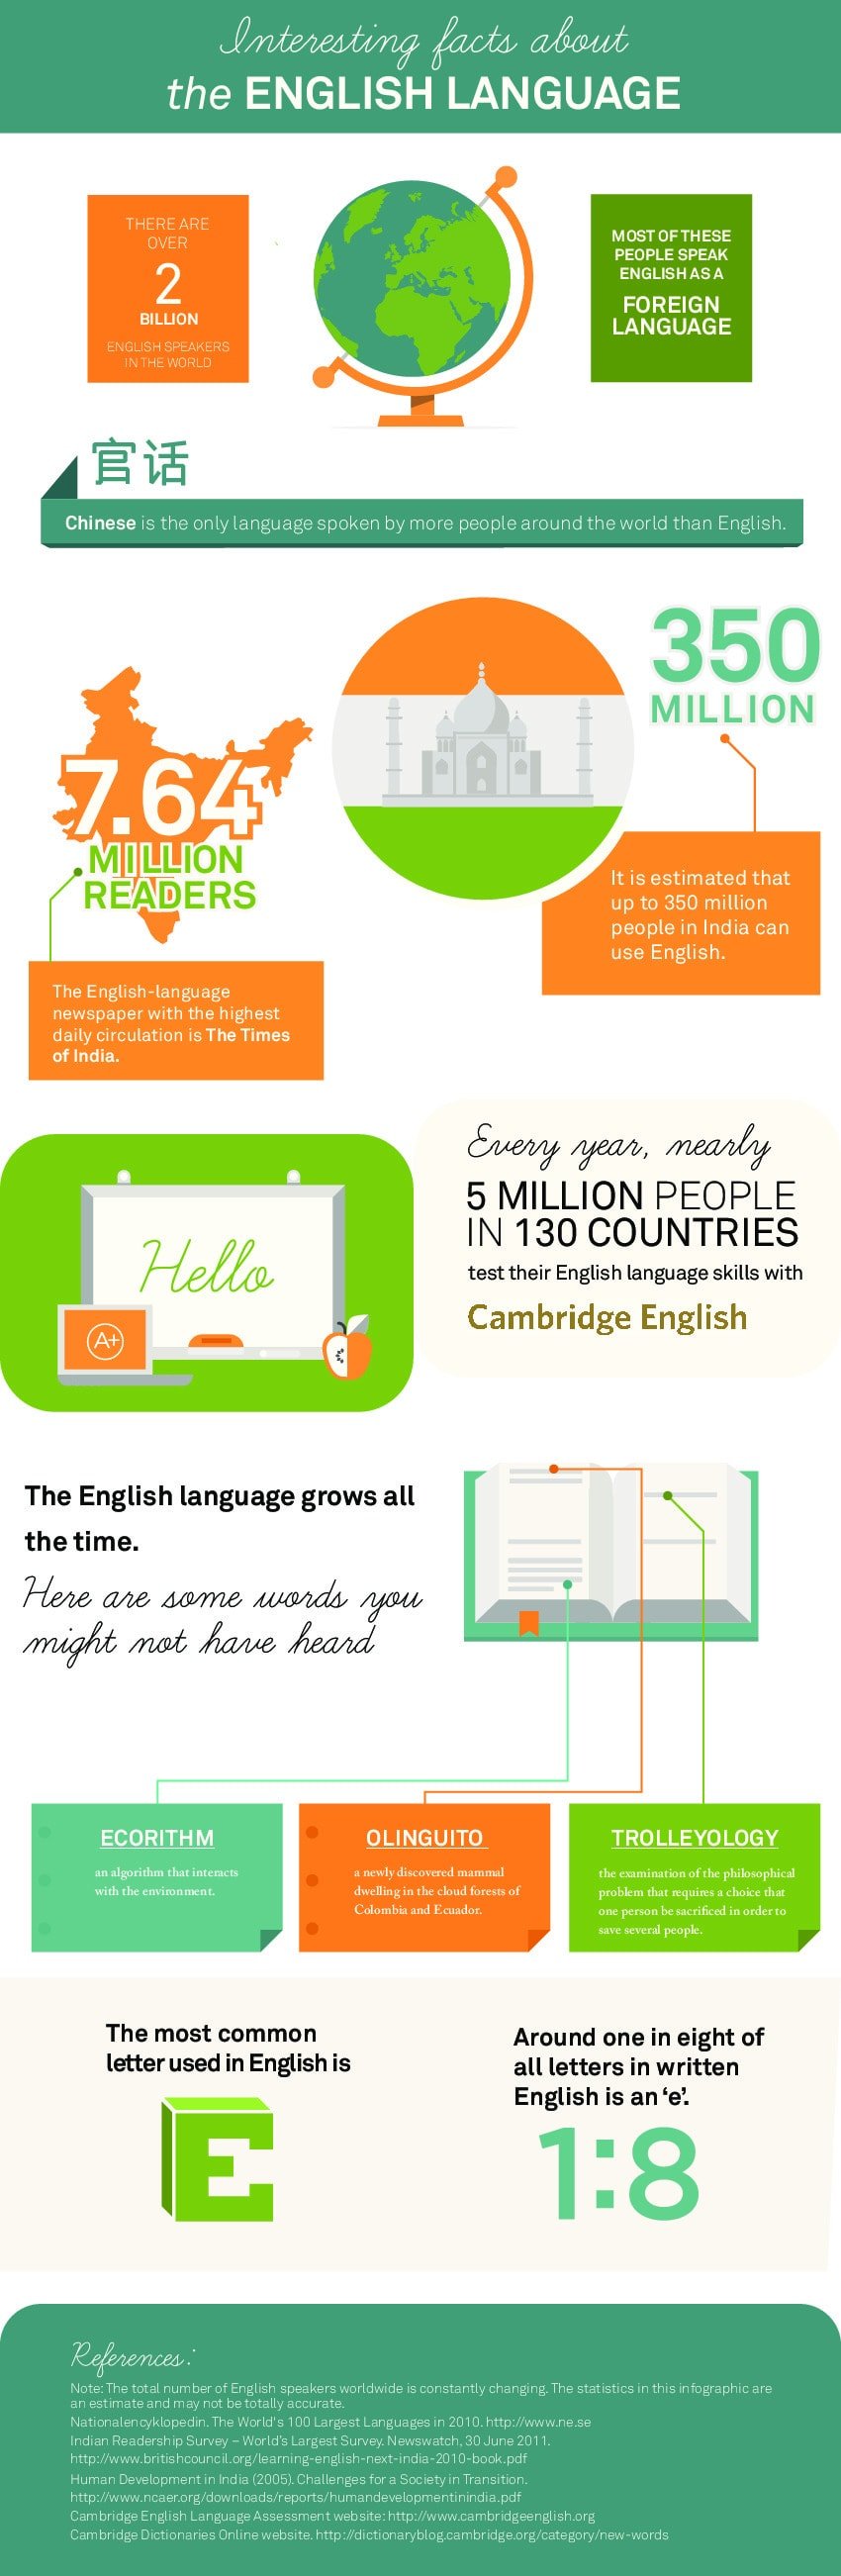 Interesting-facts-about-the-English-language-infographic